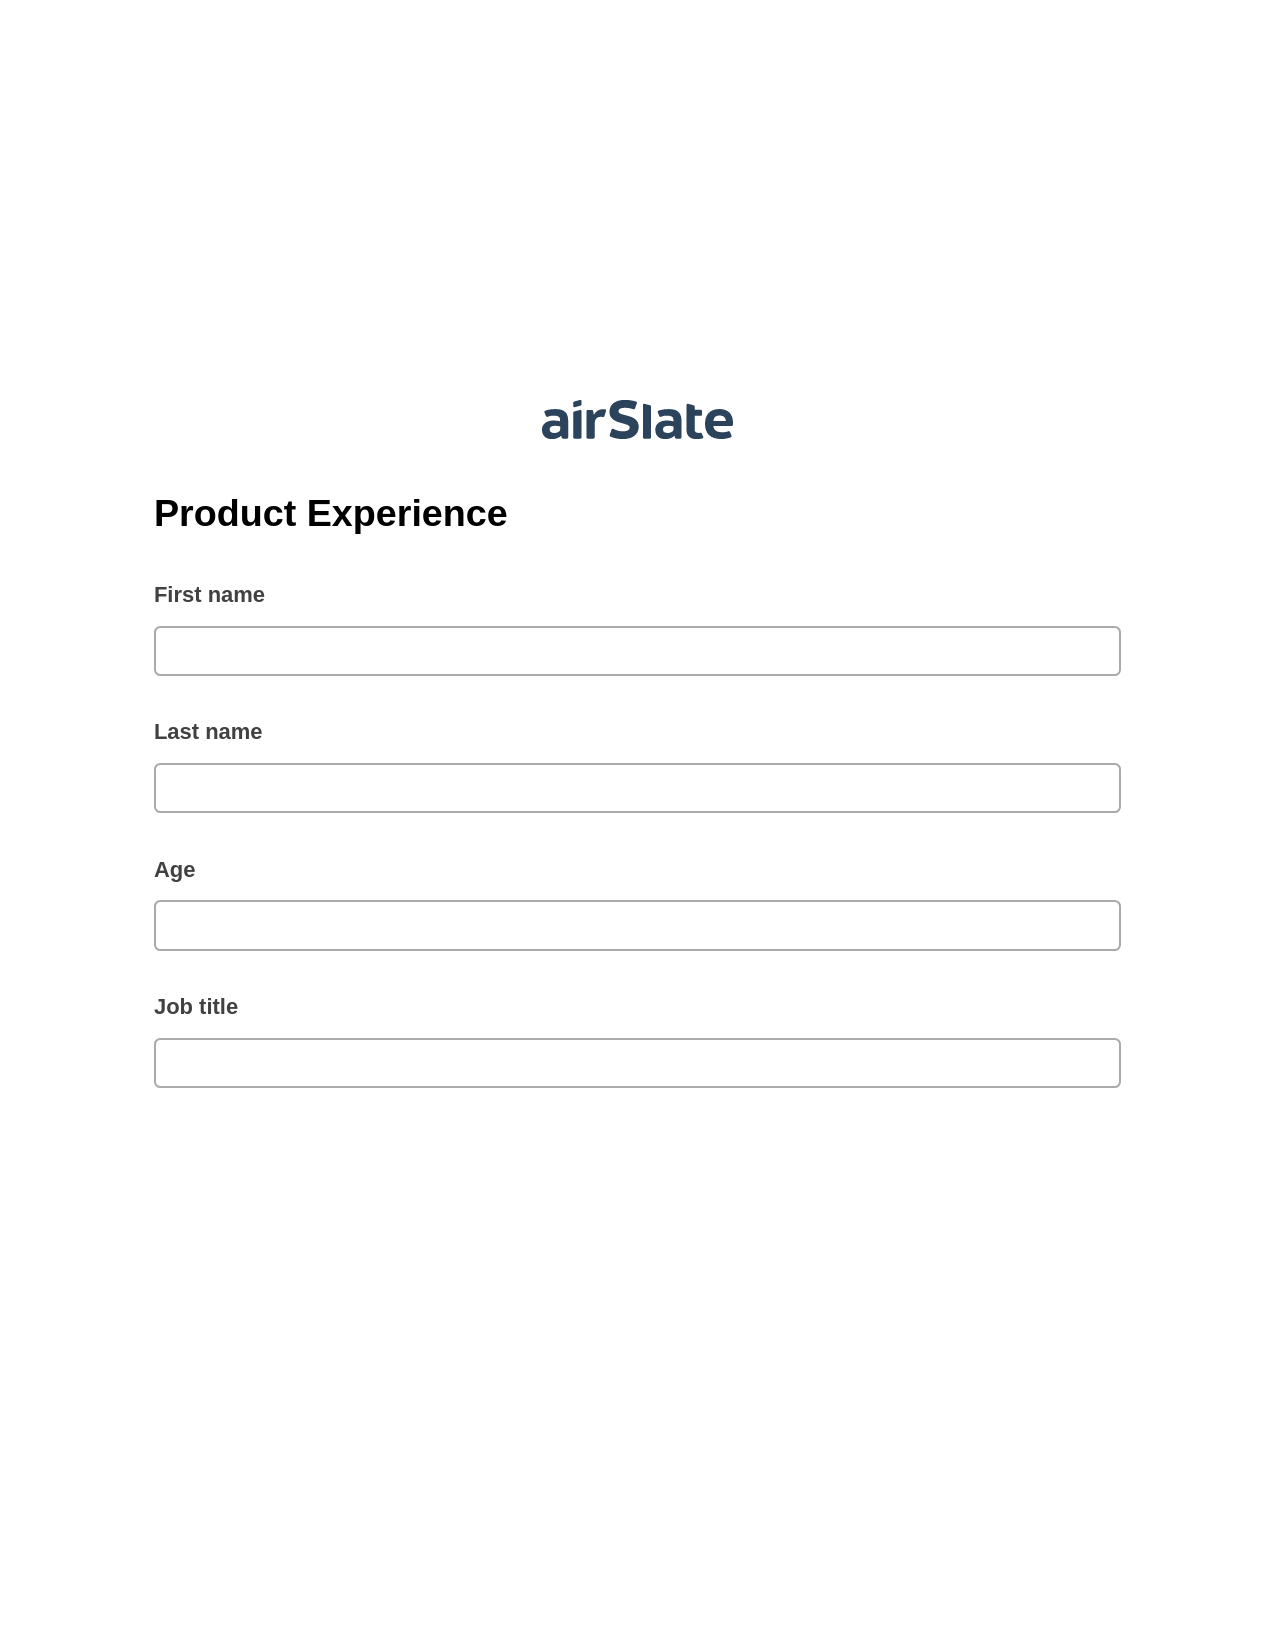 Product Experience Pre-fill from Litmos bot, Lock the Slate Bot, Archive to Box Bot